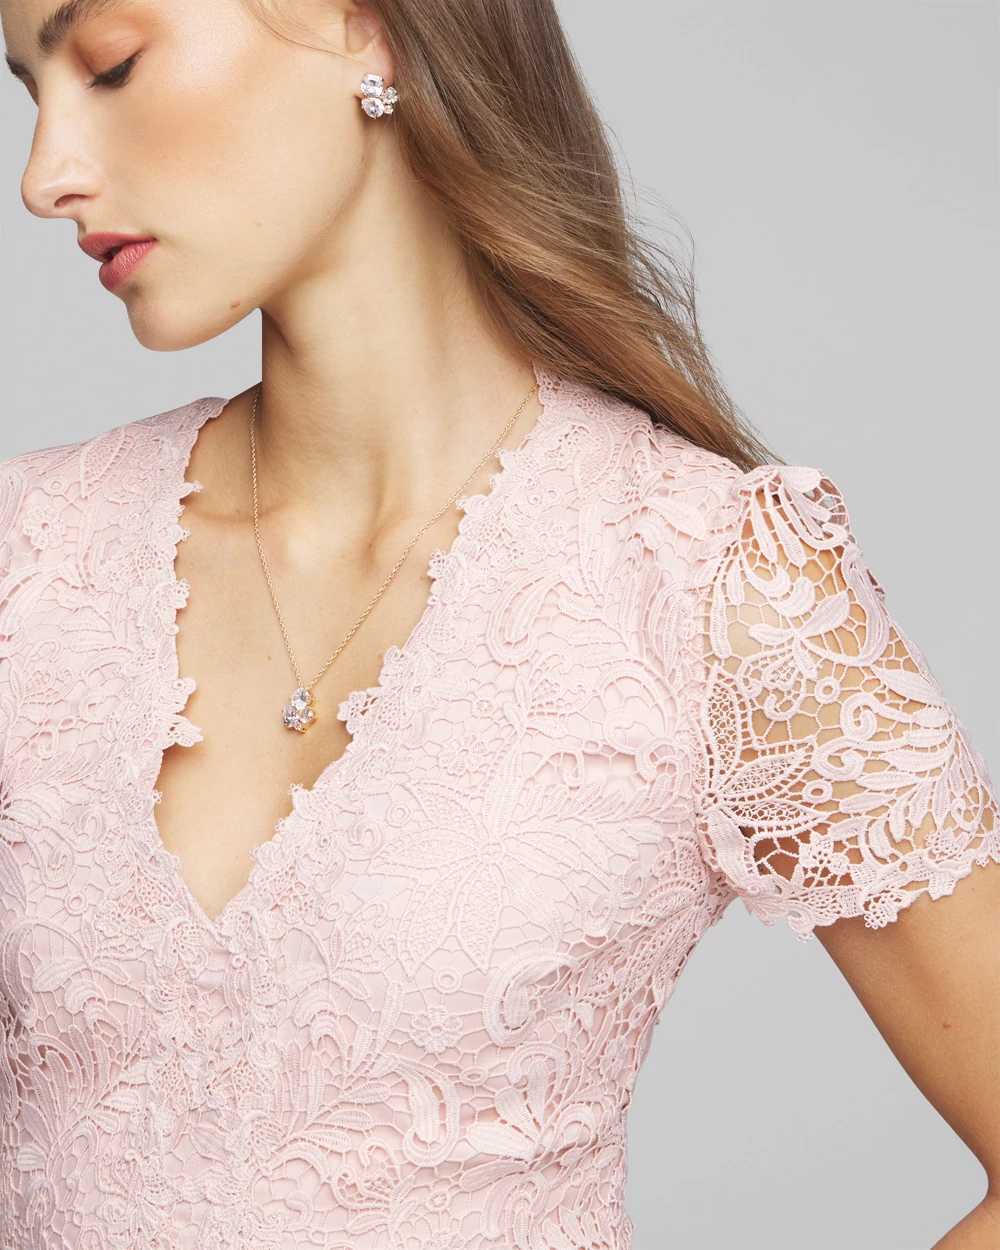 Petite Cap Sleeve V-Neck Lace Fit & Flare Midi Dress click to view larger image.